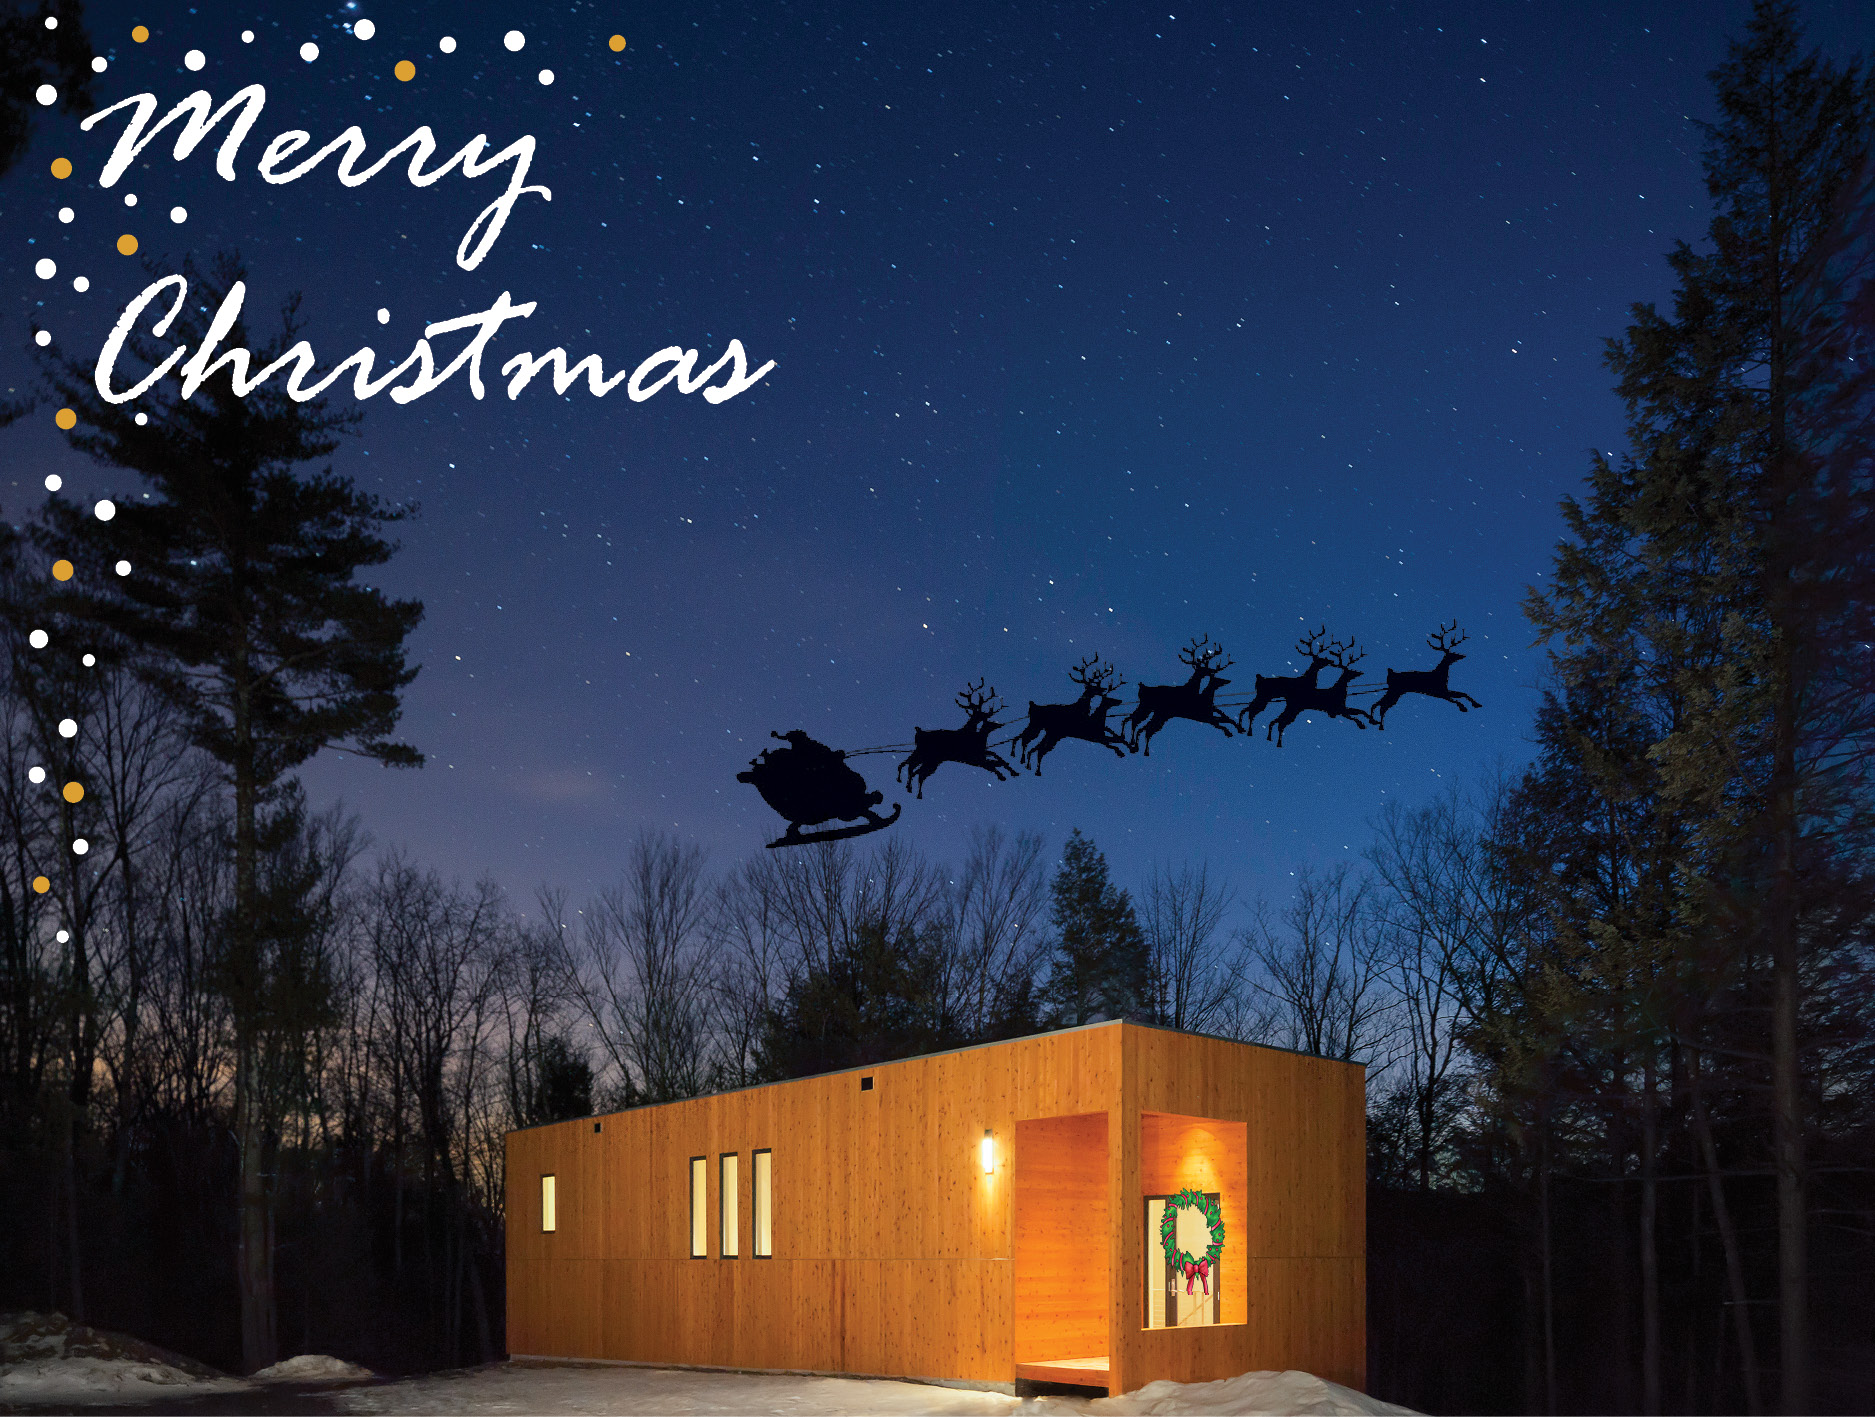 Merry Christmas from Studio MM, Architect